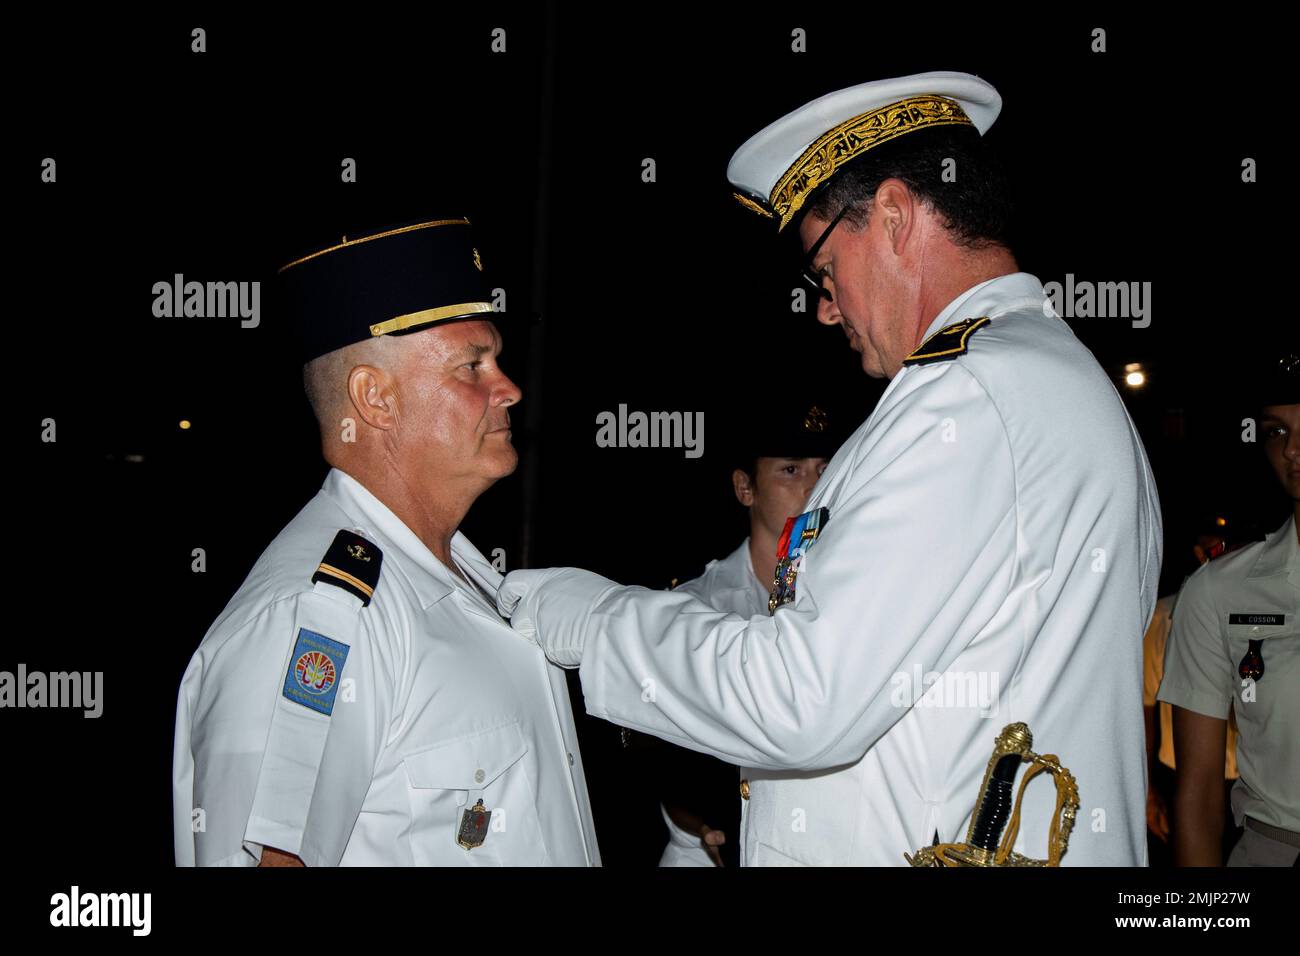 French Navy Rear Adm. Geoffroy d'Andigne, right, joint commander of the French Armed Forces in the Asia-Pacific, French Armed Forces in French Polynesia, awards the Medale Militaire to Adjutant-chef de la Gendarmerie Maritime Olivier Landes during the Bazeilles Day Ceremony in Arue, Tahiti, French Polynesia, Aug. 31, 2022. The ceremony honored the events of the Franco-Prussian War in 1870, when French Marines stood up to a force of Bavarians who outnumbered the French 10 to one. Taking place in the French Village of Bazeilles, the battle is considered one of the first occurrences of urban warf Stock Photo